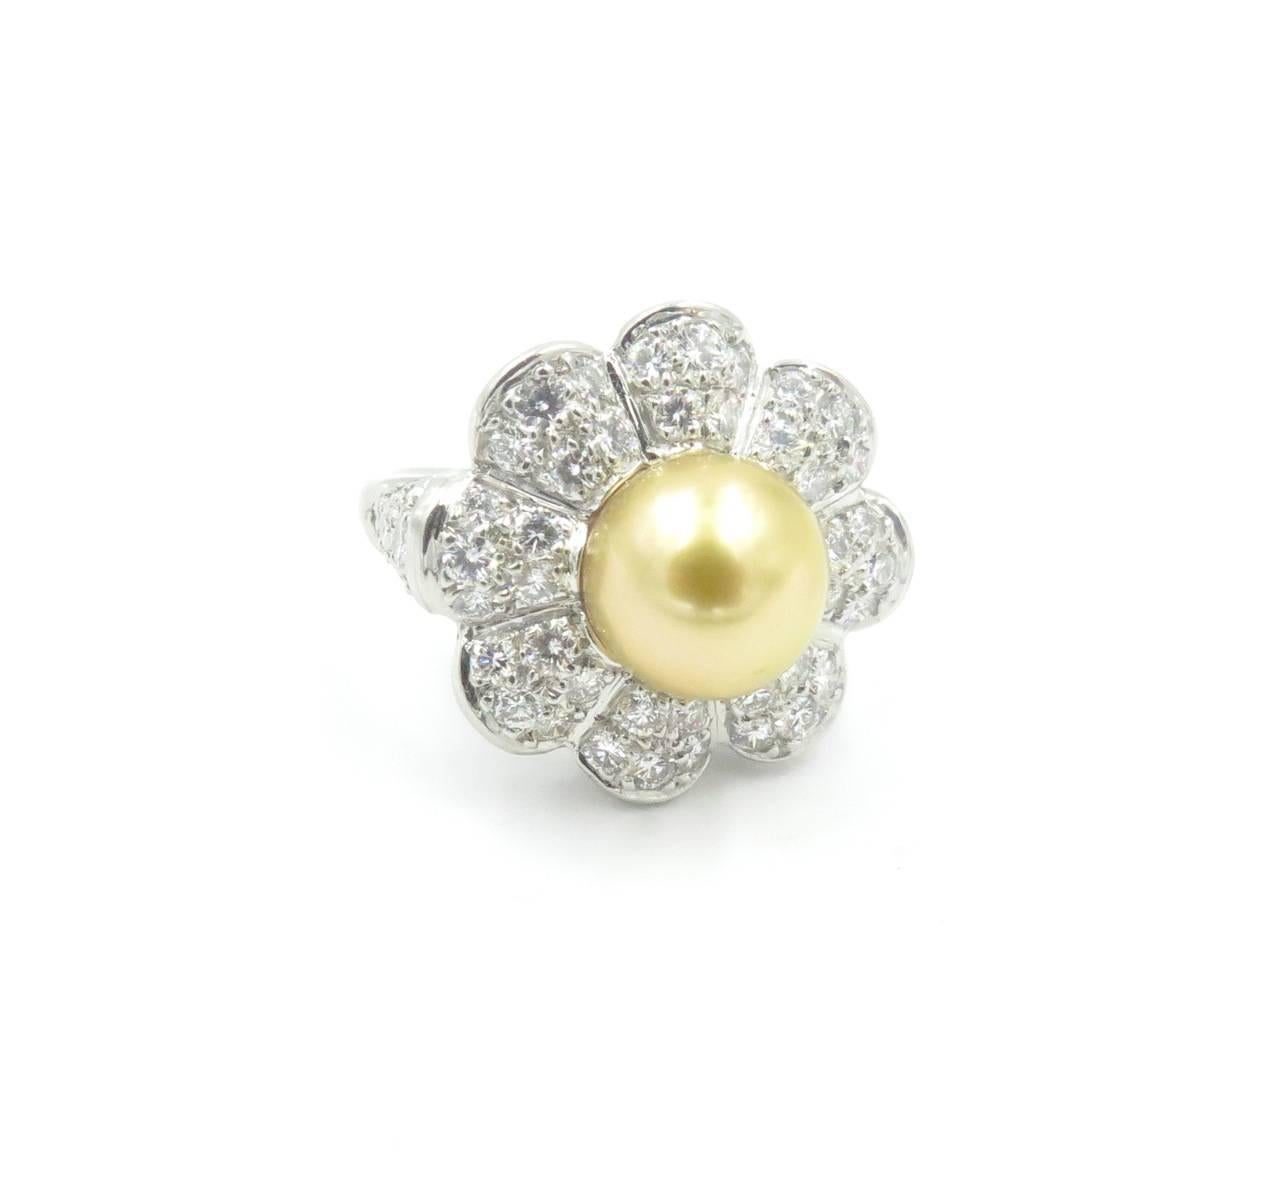 A platinum, diamond and 9.5 mm golden pearl ring.  The ring is designed with a center pearl, set in a lobed pave diamond flower form mount with diamonds on each shoulder.  The ring contains a total of 54 round brilliant cut diamonds weighing a total